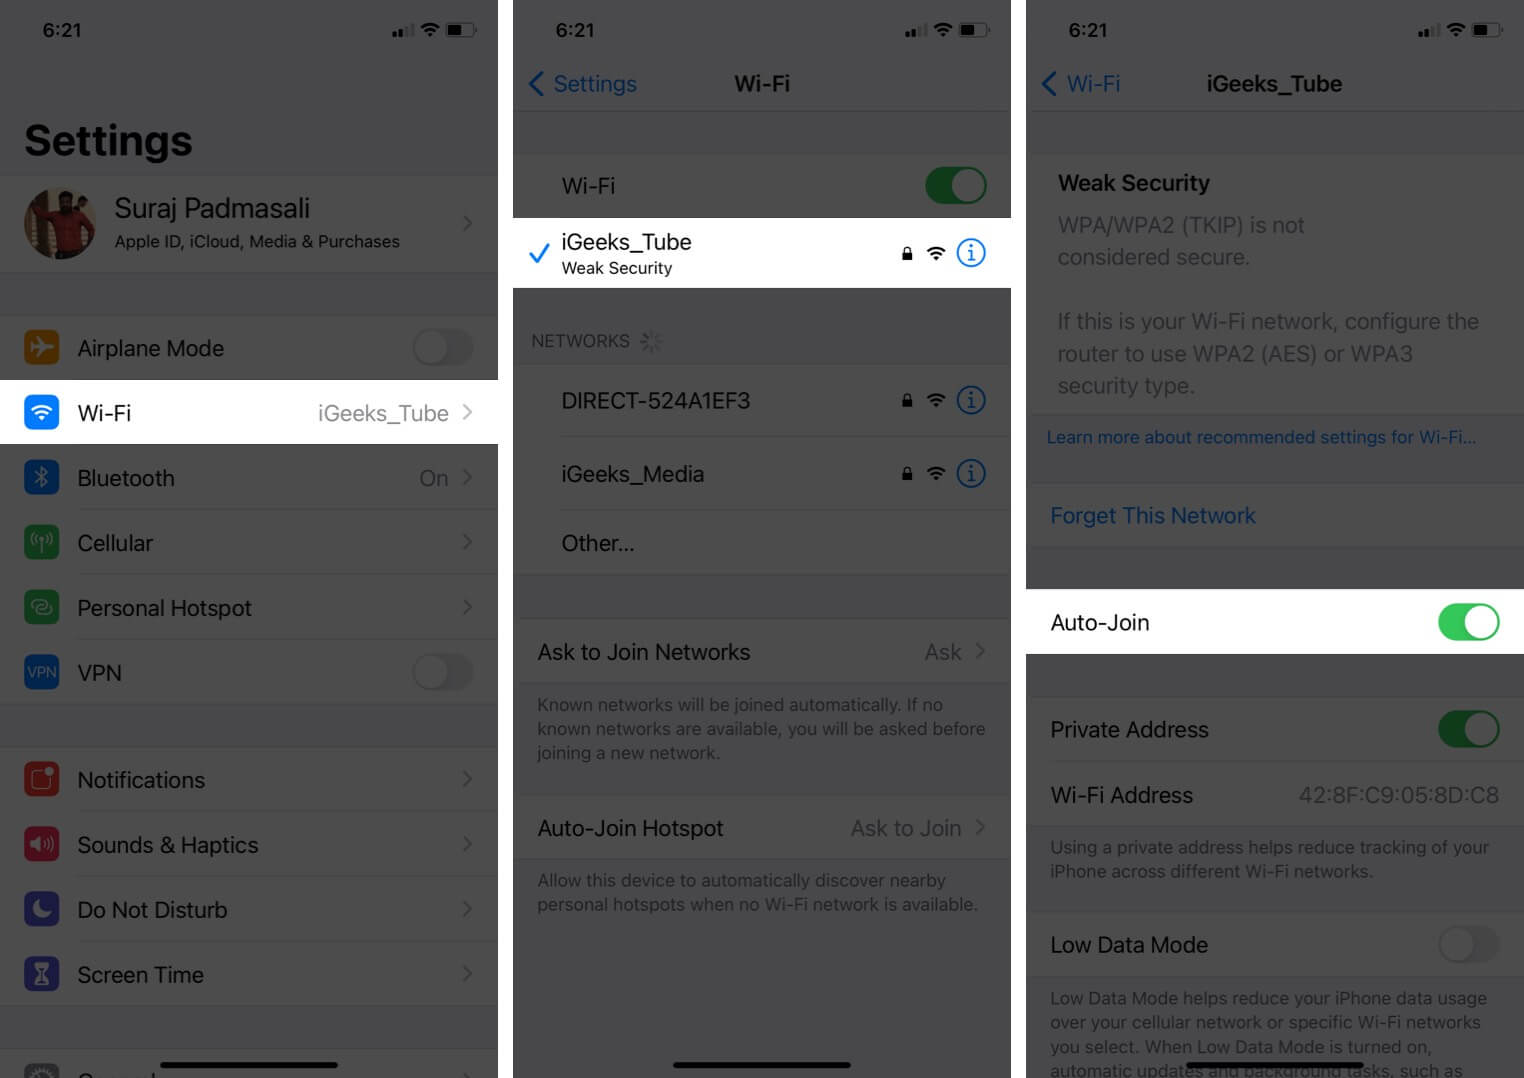 tap-on-wi-fi-in-iphone-settings-then-tap-on-i-next-to-connected-wi-fi-and-then-enable-auto-join